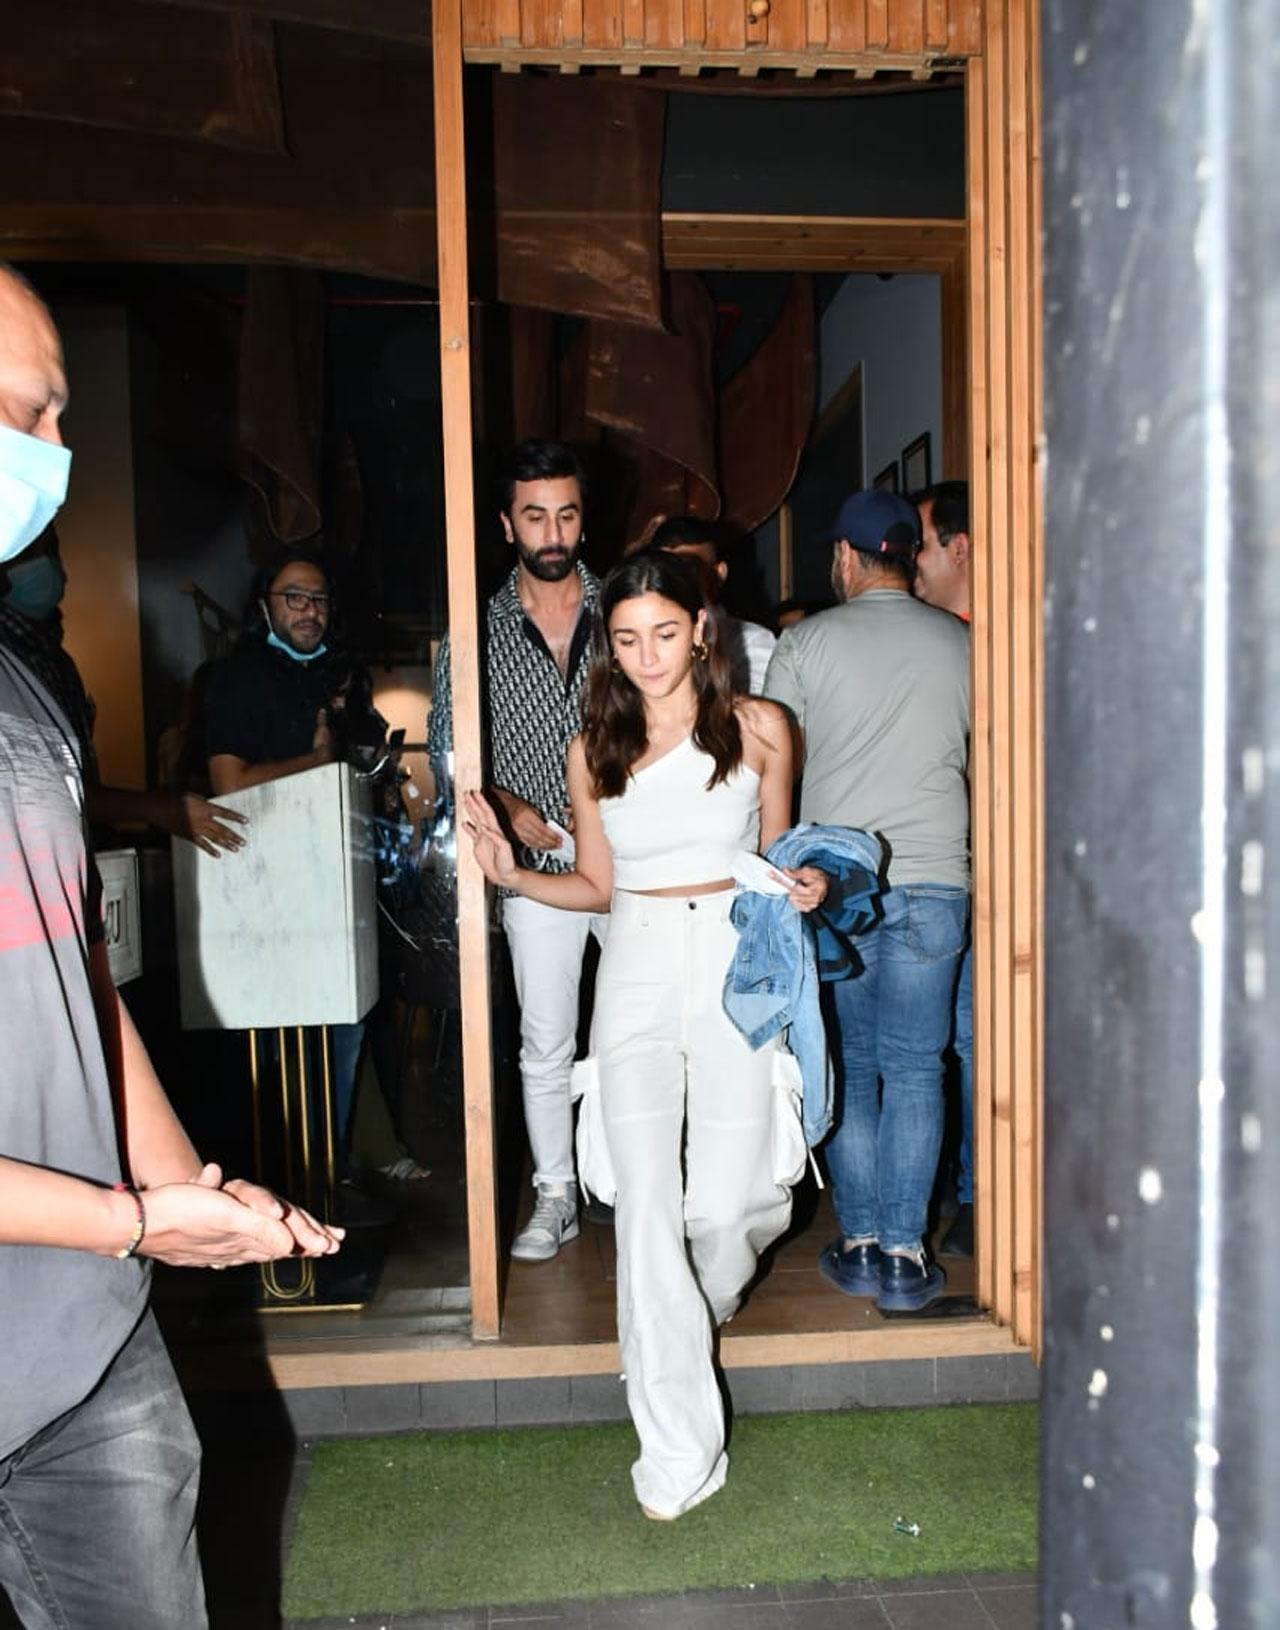 Alia Bhatt who is riding high on the success of Gangubai Kathiawadi was seen celebrating her special moment with her beau Ranbir Kapoor. The couple were up and about in the city last night.